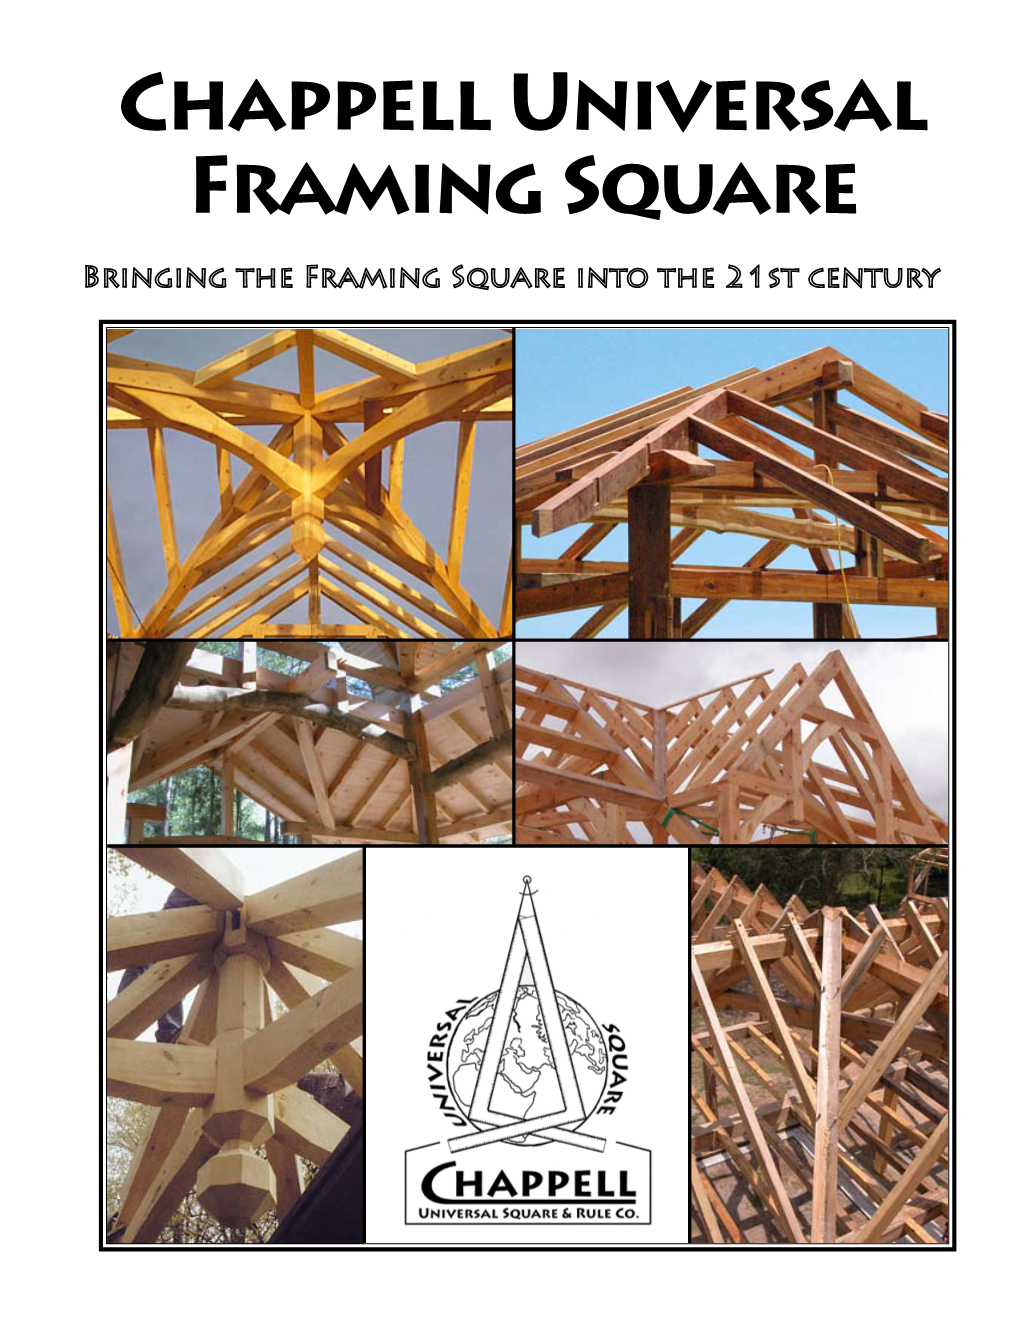 Chappell Universal Framing Square the Chappell Universal Squaretm Puts a Wealth of Building Knowledge Right in the Palm of Your Hand